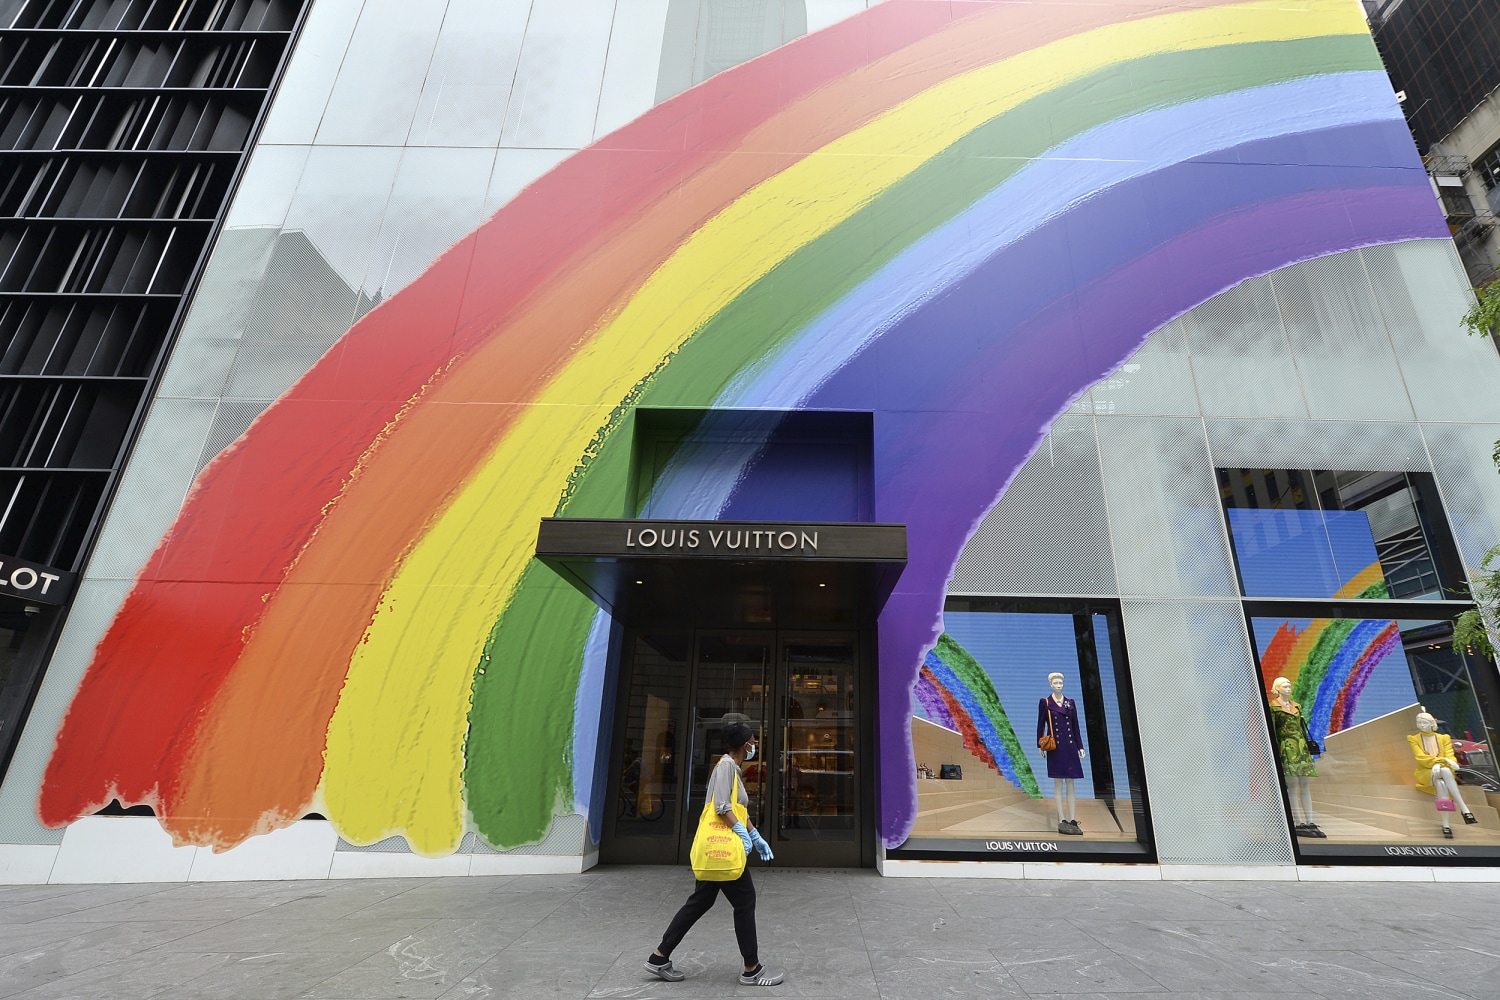 Louis Vuitton gets under Diet Prada's radar for omitting LGBTQ+ references  in their 'rainbow-based' communication during Pride Month